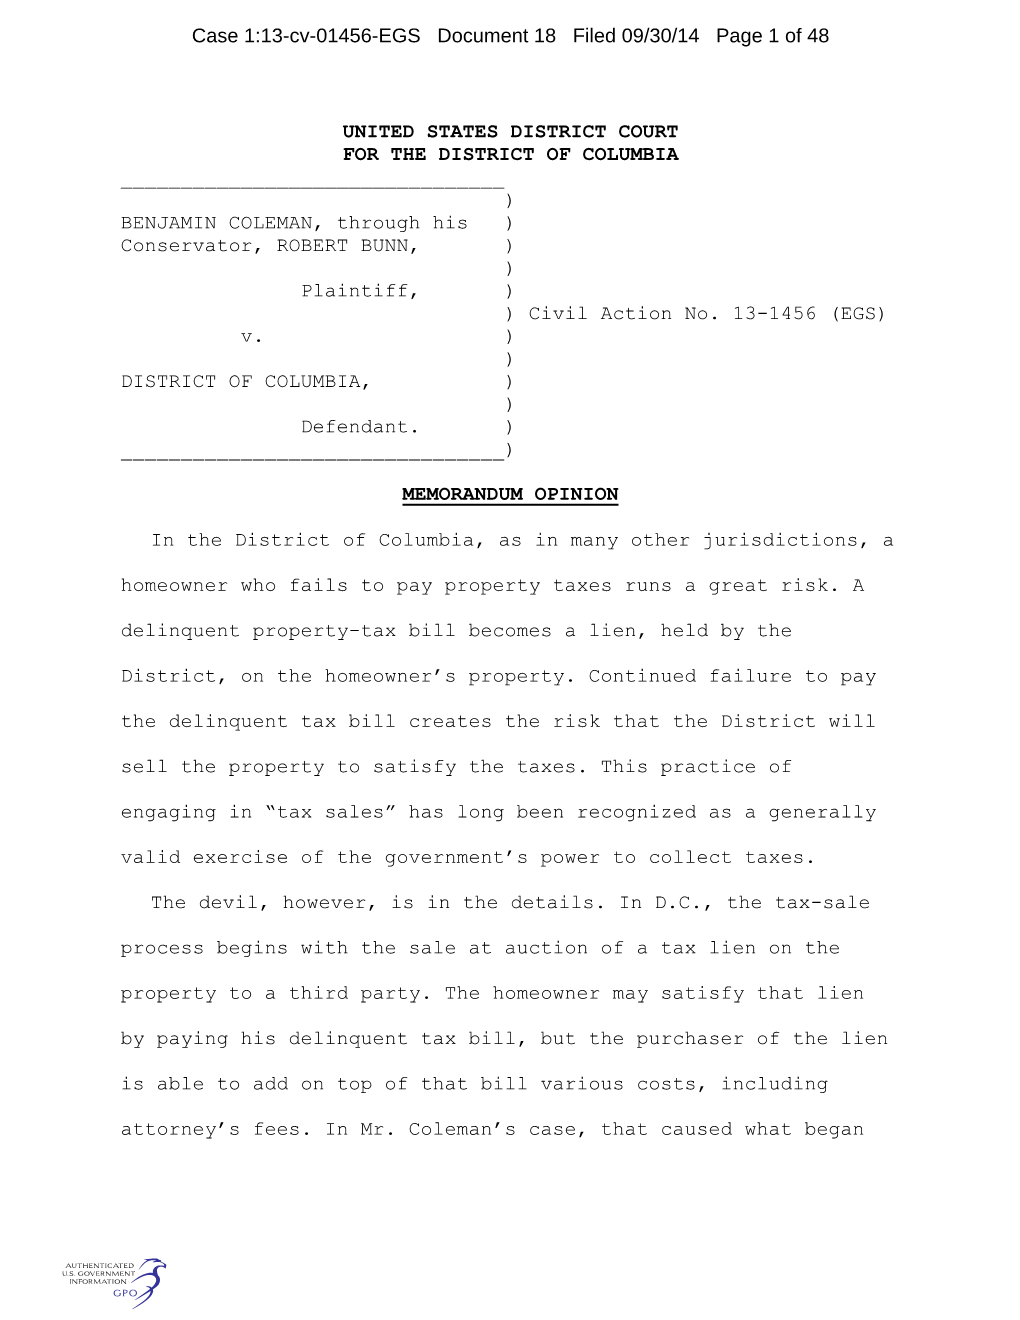 Case 1:13-Cv-01456-EGS Document 18 Filed 09/30/14 Page 1 of 48